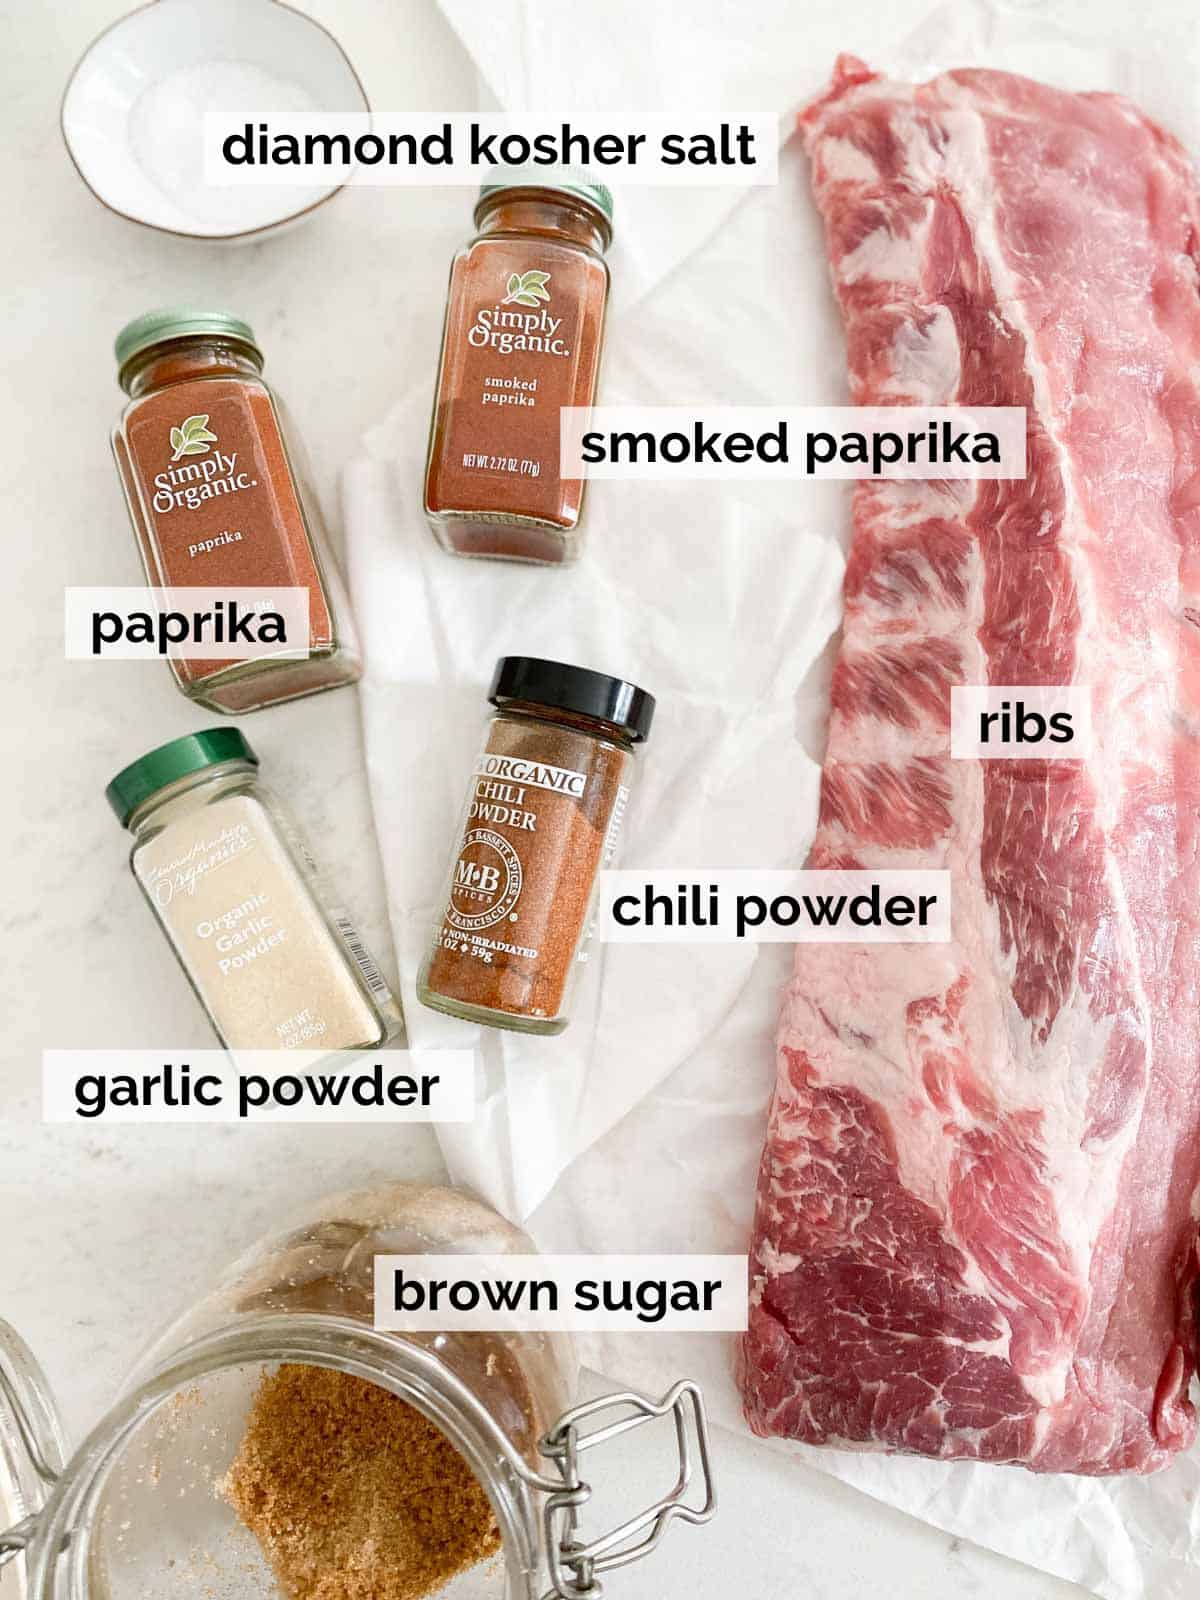 Ingredients for a dry rub next to ribs on a white background.